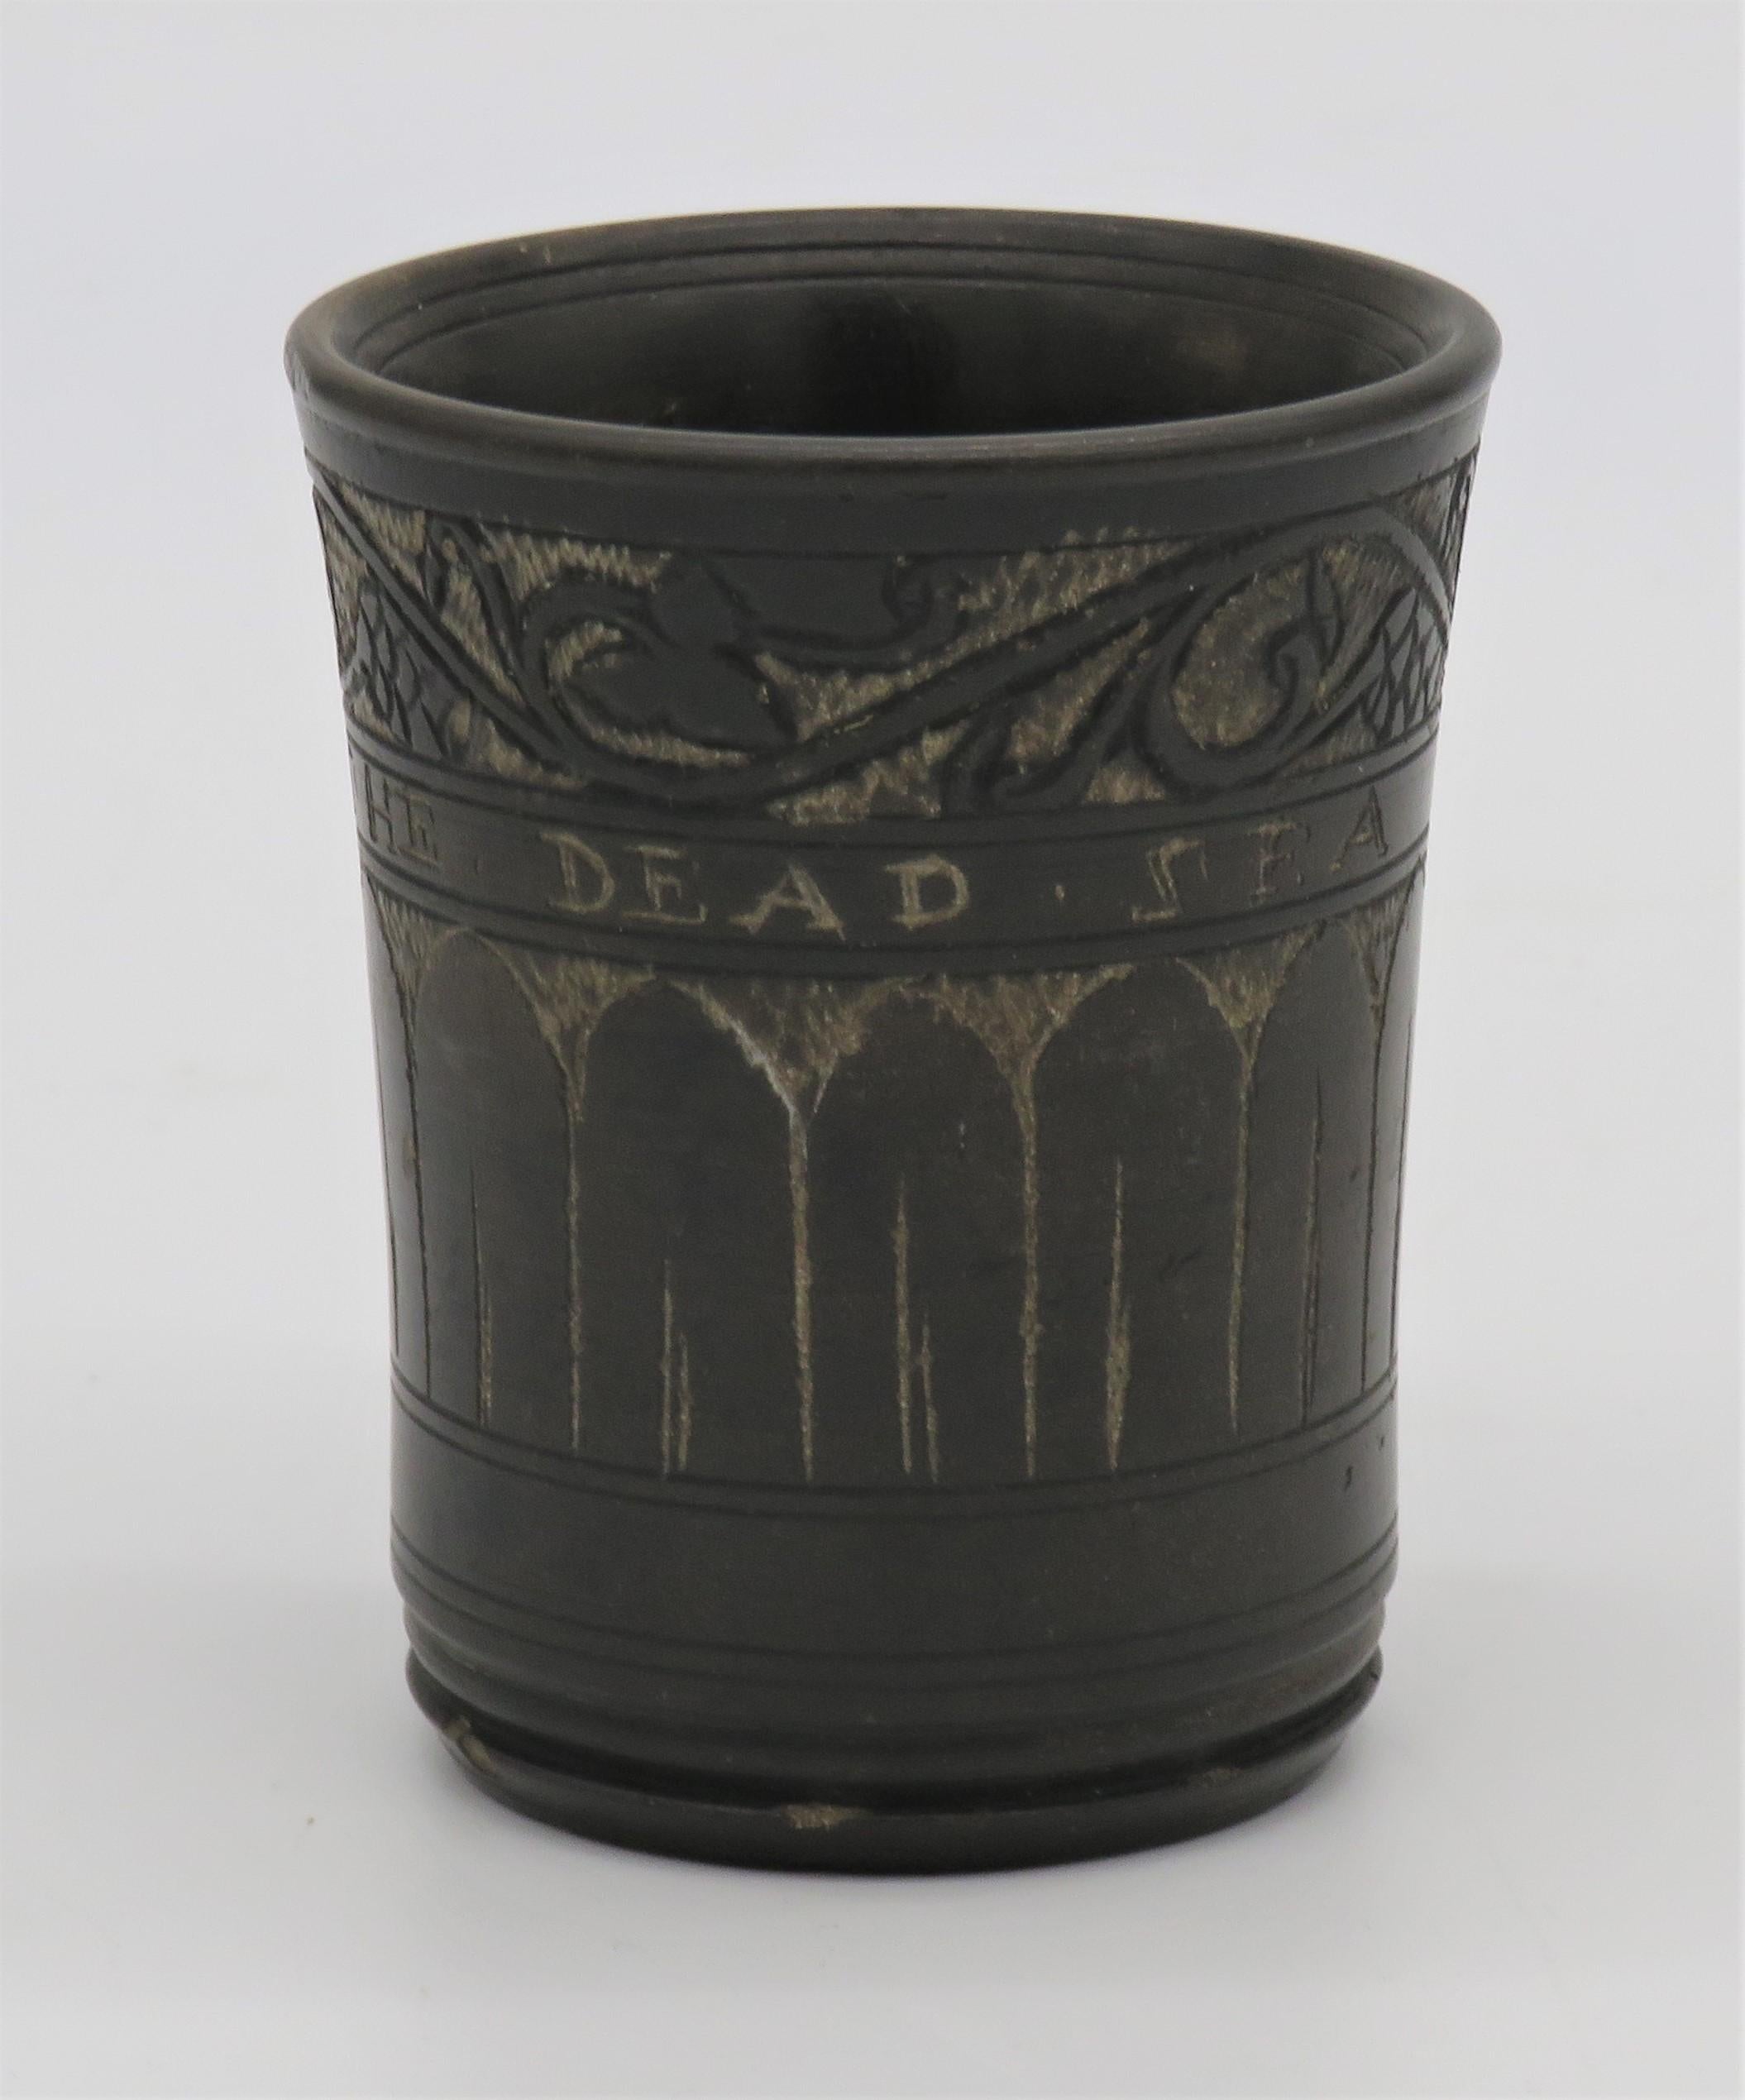 Bitumen dead sea engraved stone cup, circa 1860.
Black bitumen stone carved for Kiddush ceremonies with grape leaves and vines on the top register. 